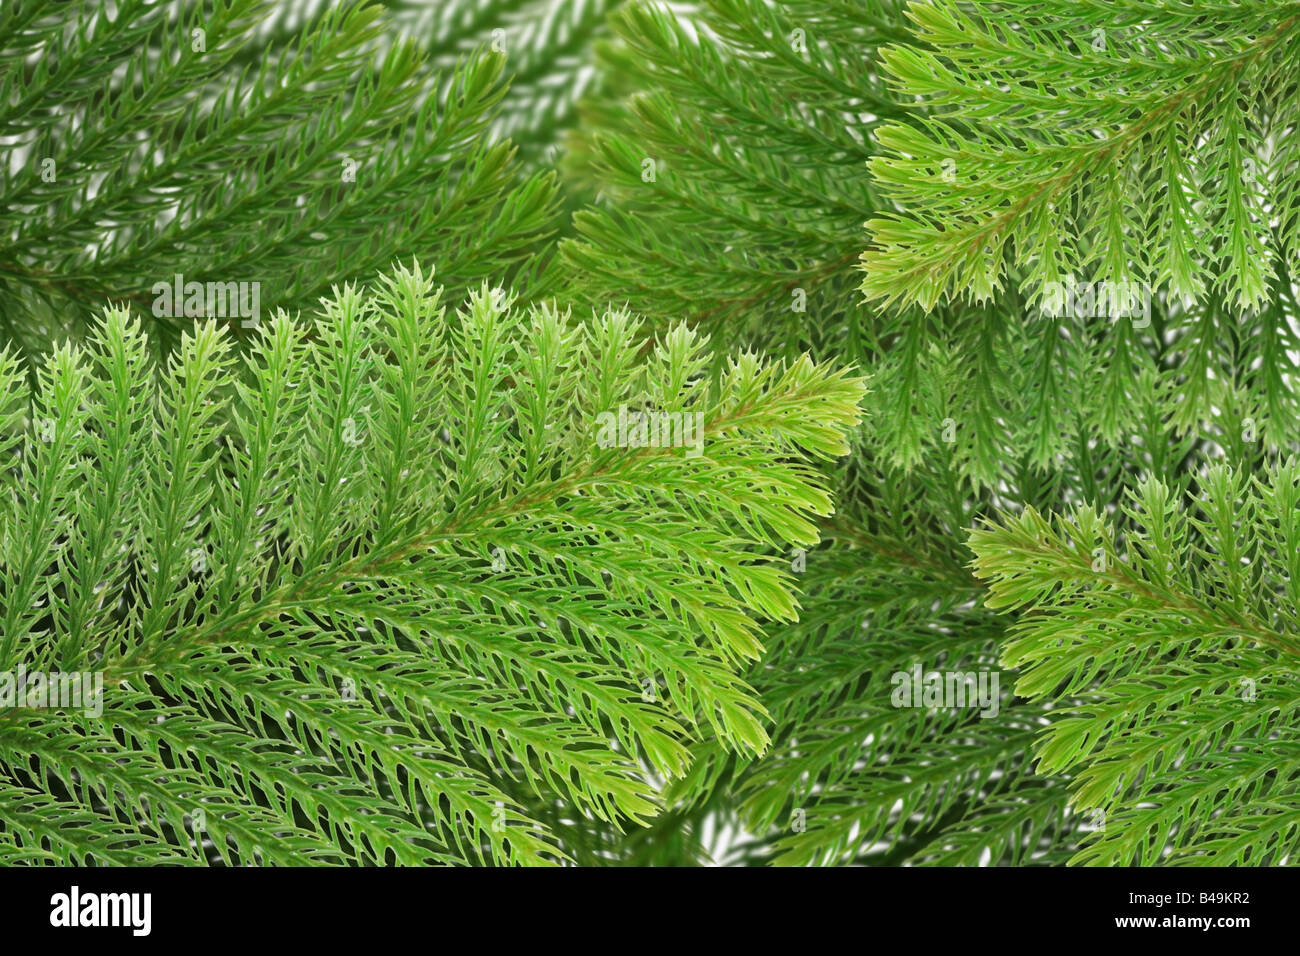 Evergreen coniferous leaves background Stock Photo